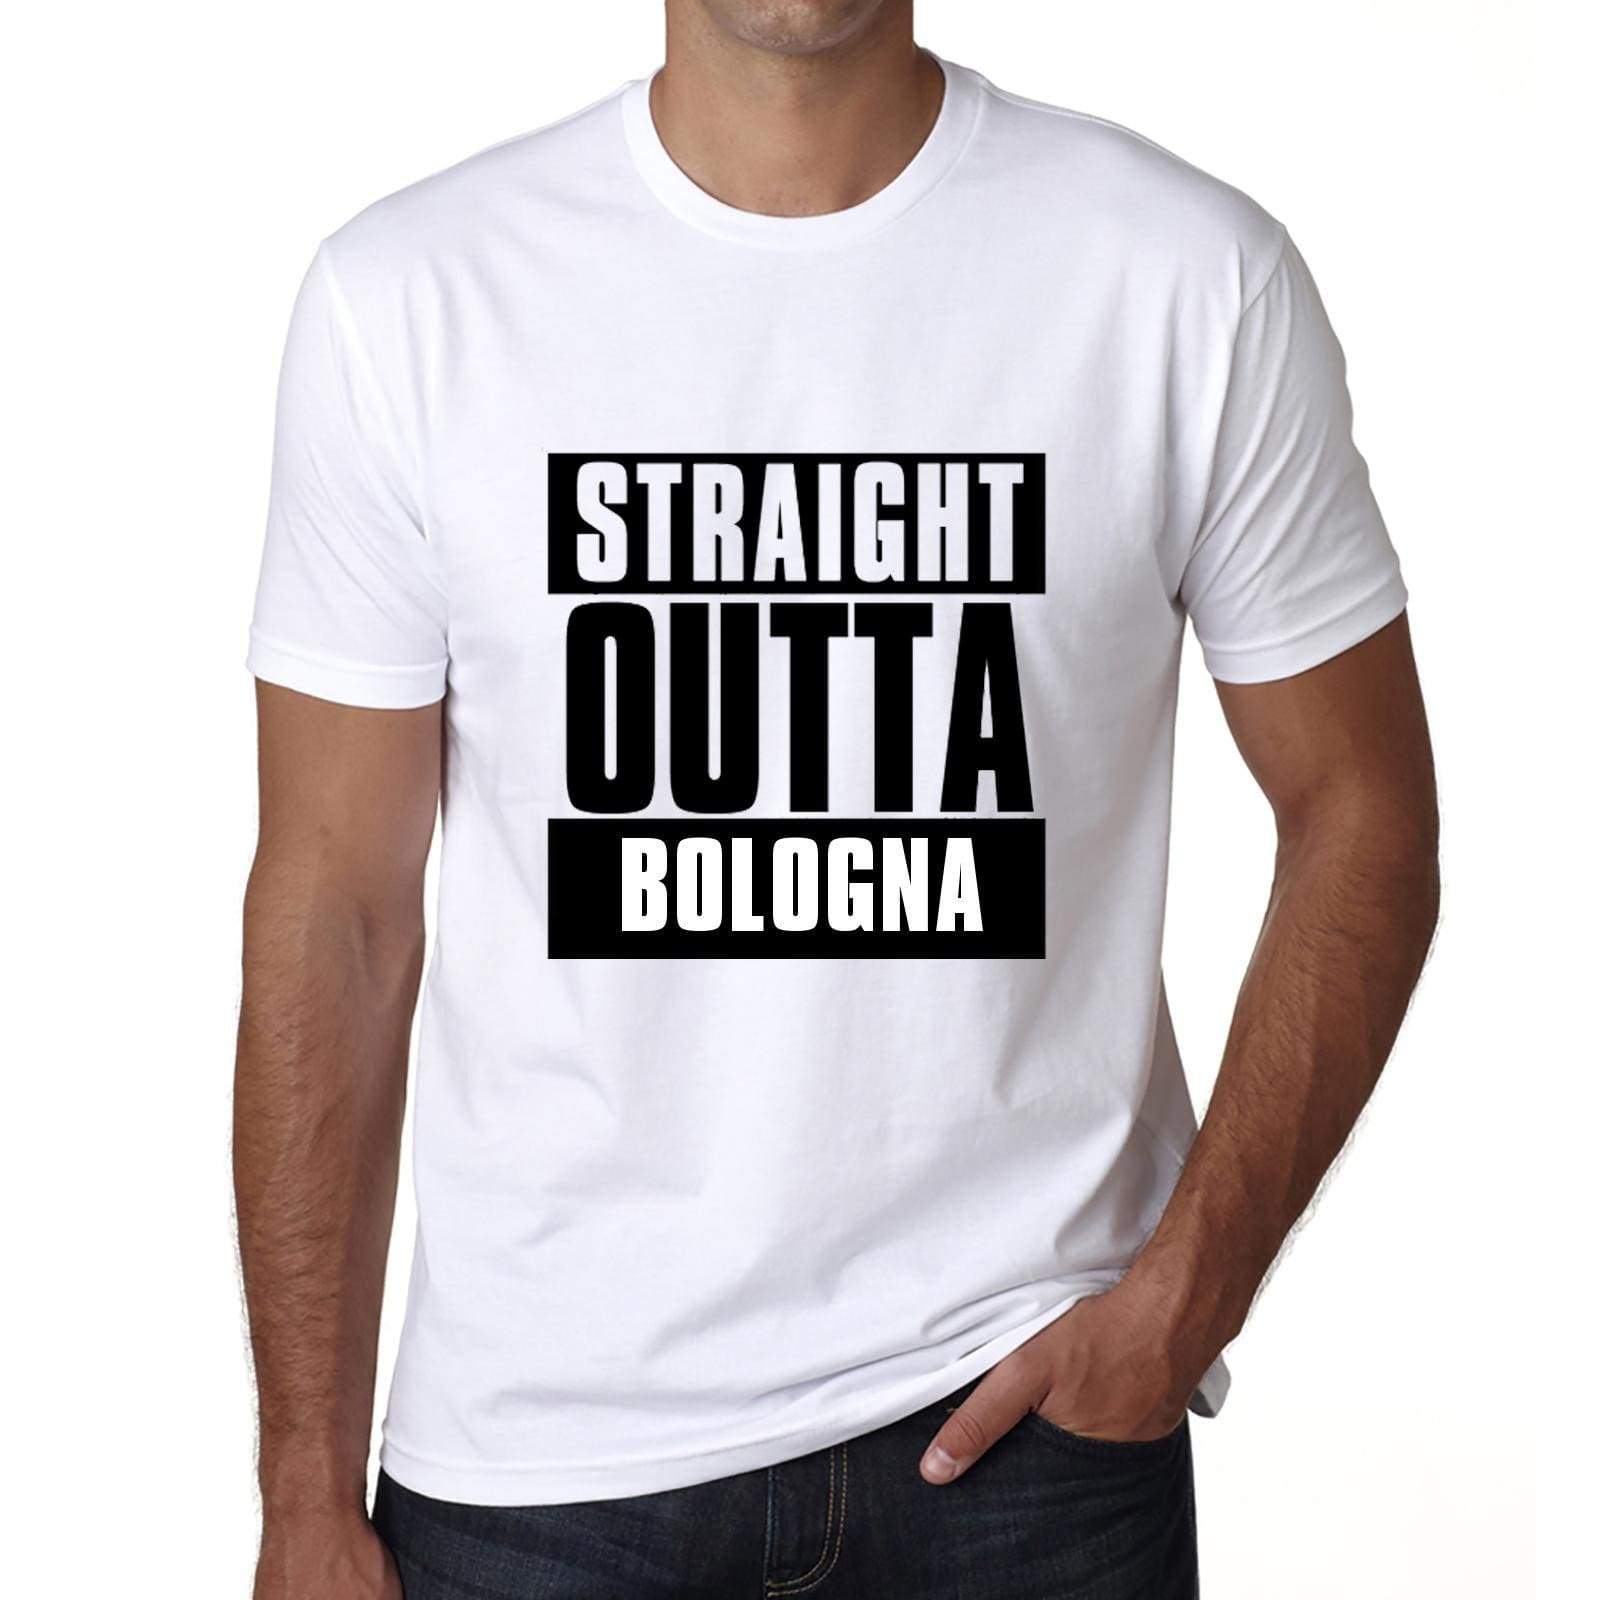 Straight Outta Bologna Mens Short Sleeve Round Neck T-Shirt 00027 - White / S - Casual